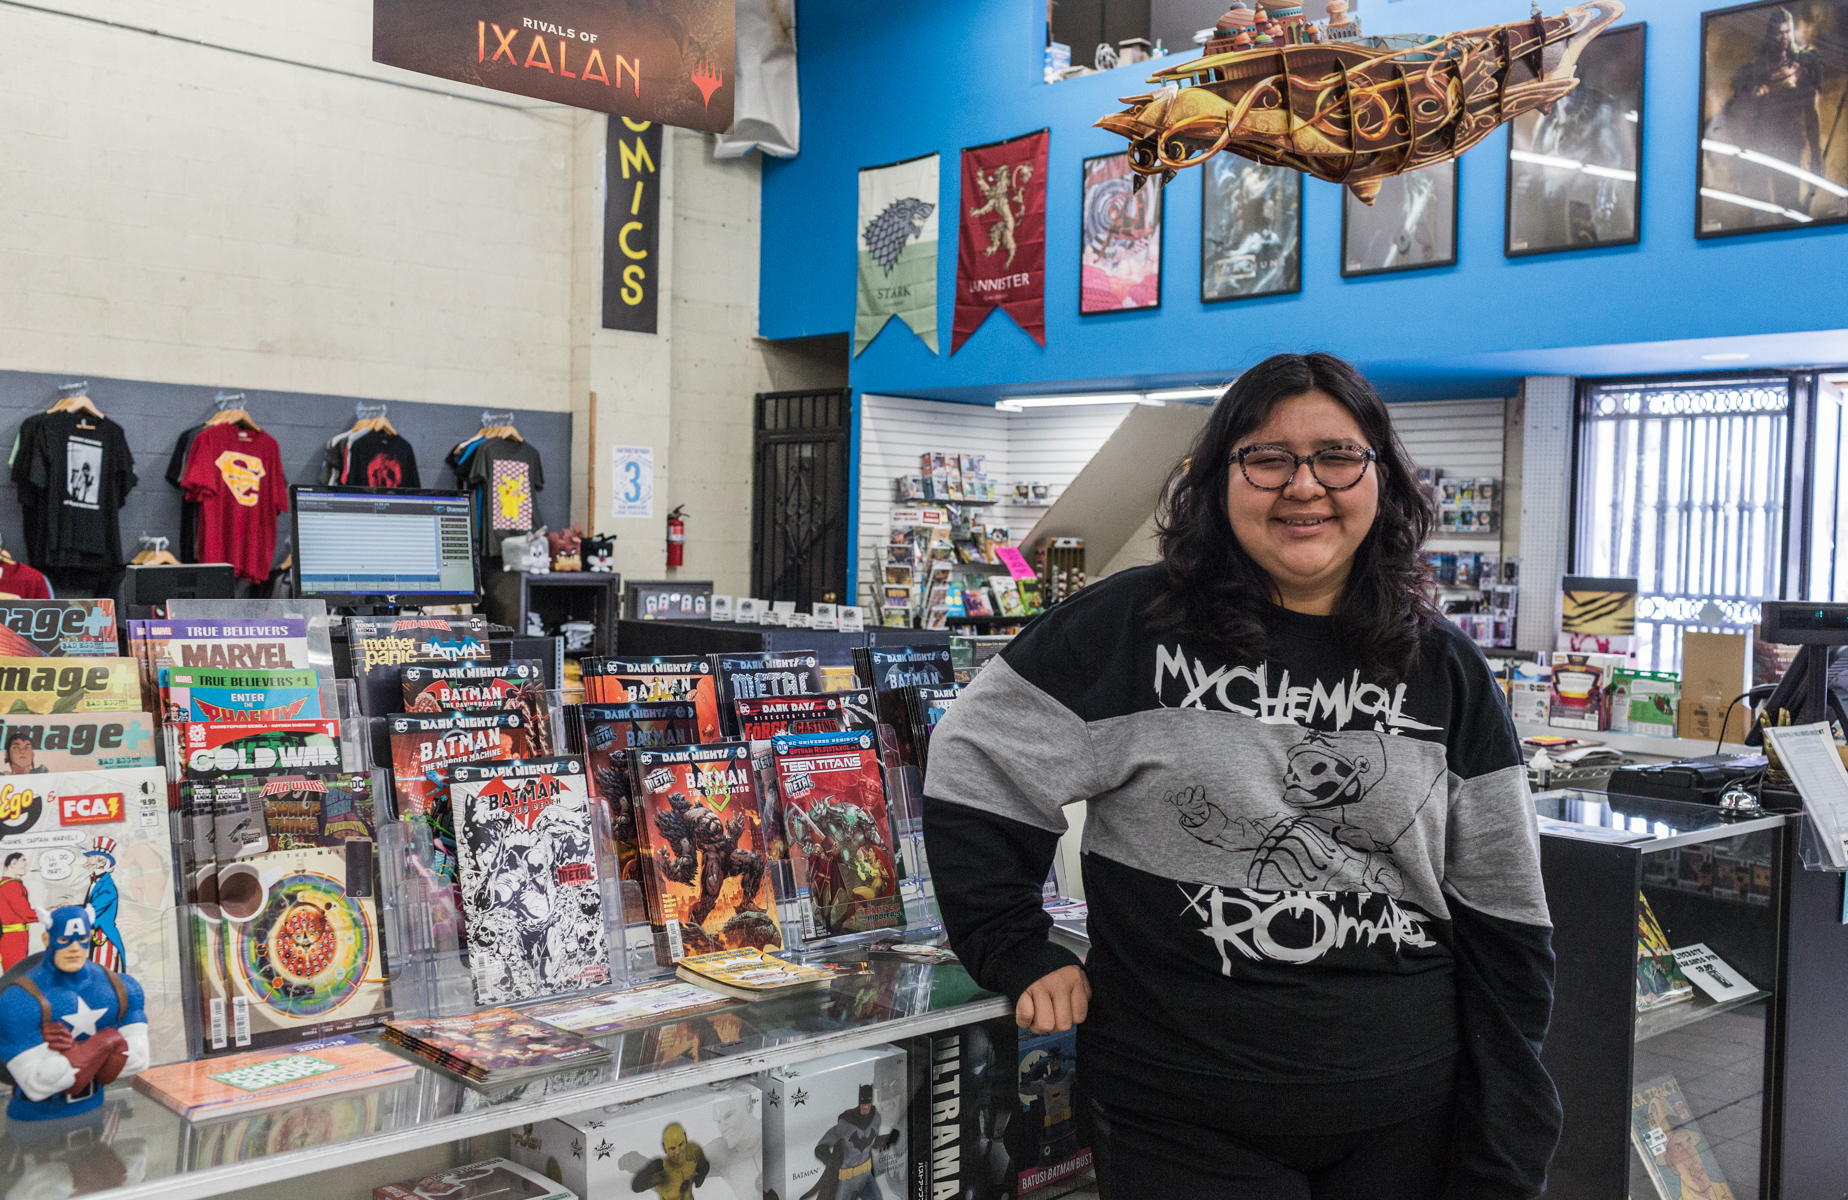  Jennifer Lopez, an employee of Southern California's oldest running comic book store 'HI DE HO COMICS', poses in front of their merchandise at their Santa Monice store in Santa Monica, CA on Thursday March 1 2018. (Photo by Ruth Iorio) 